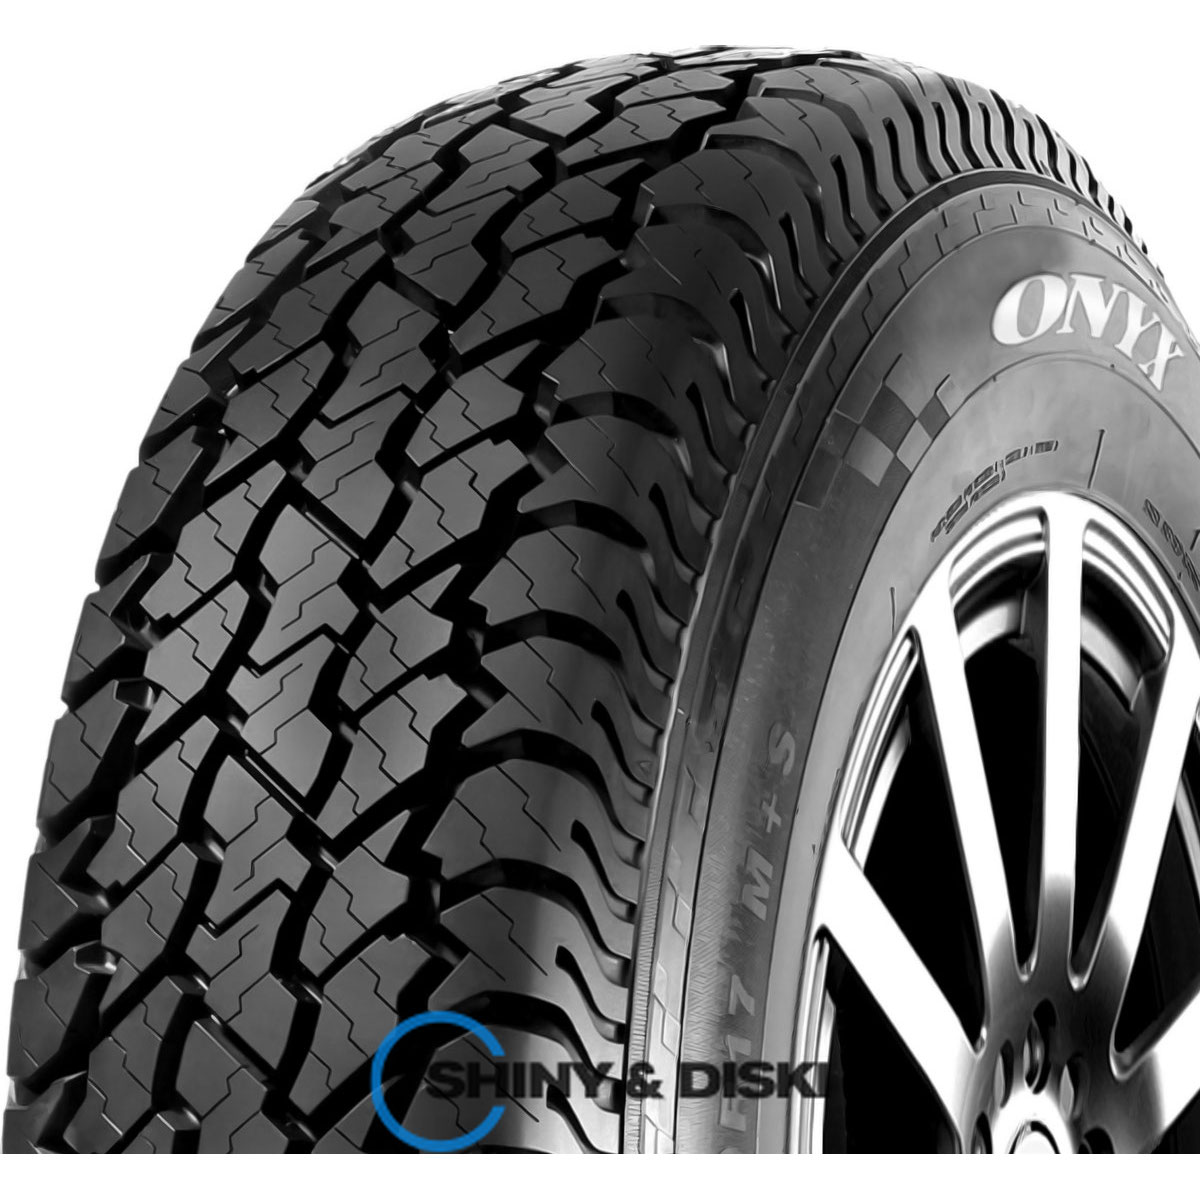 покришки onyx ny-at187 31/10.5 r15 109r